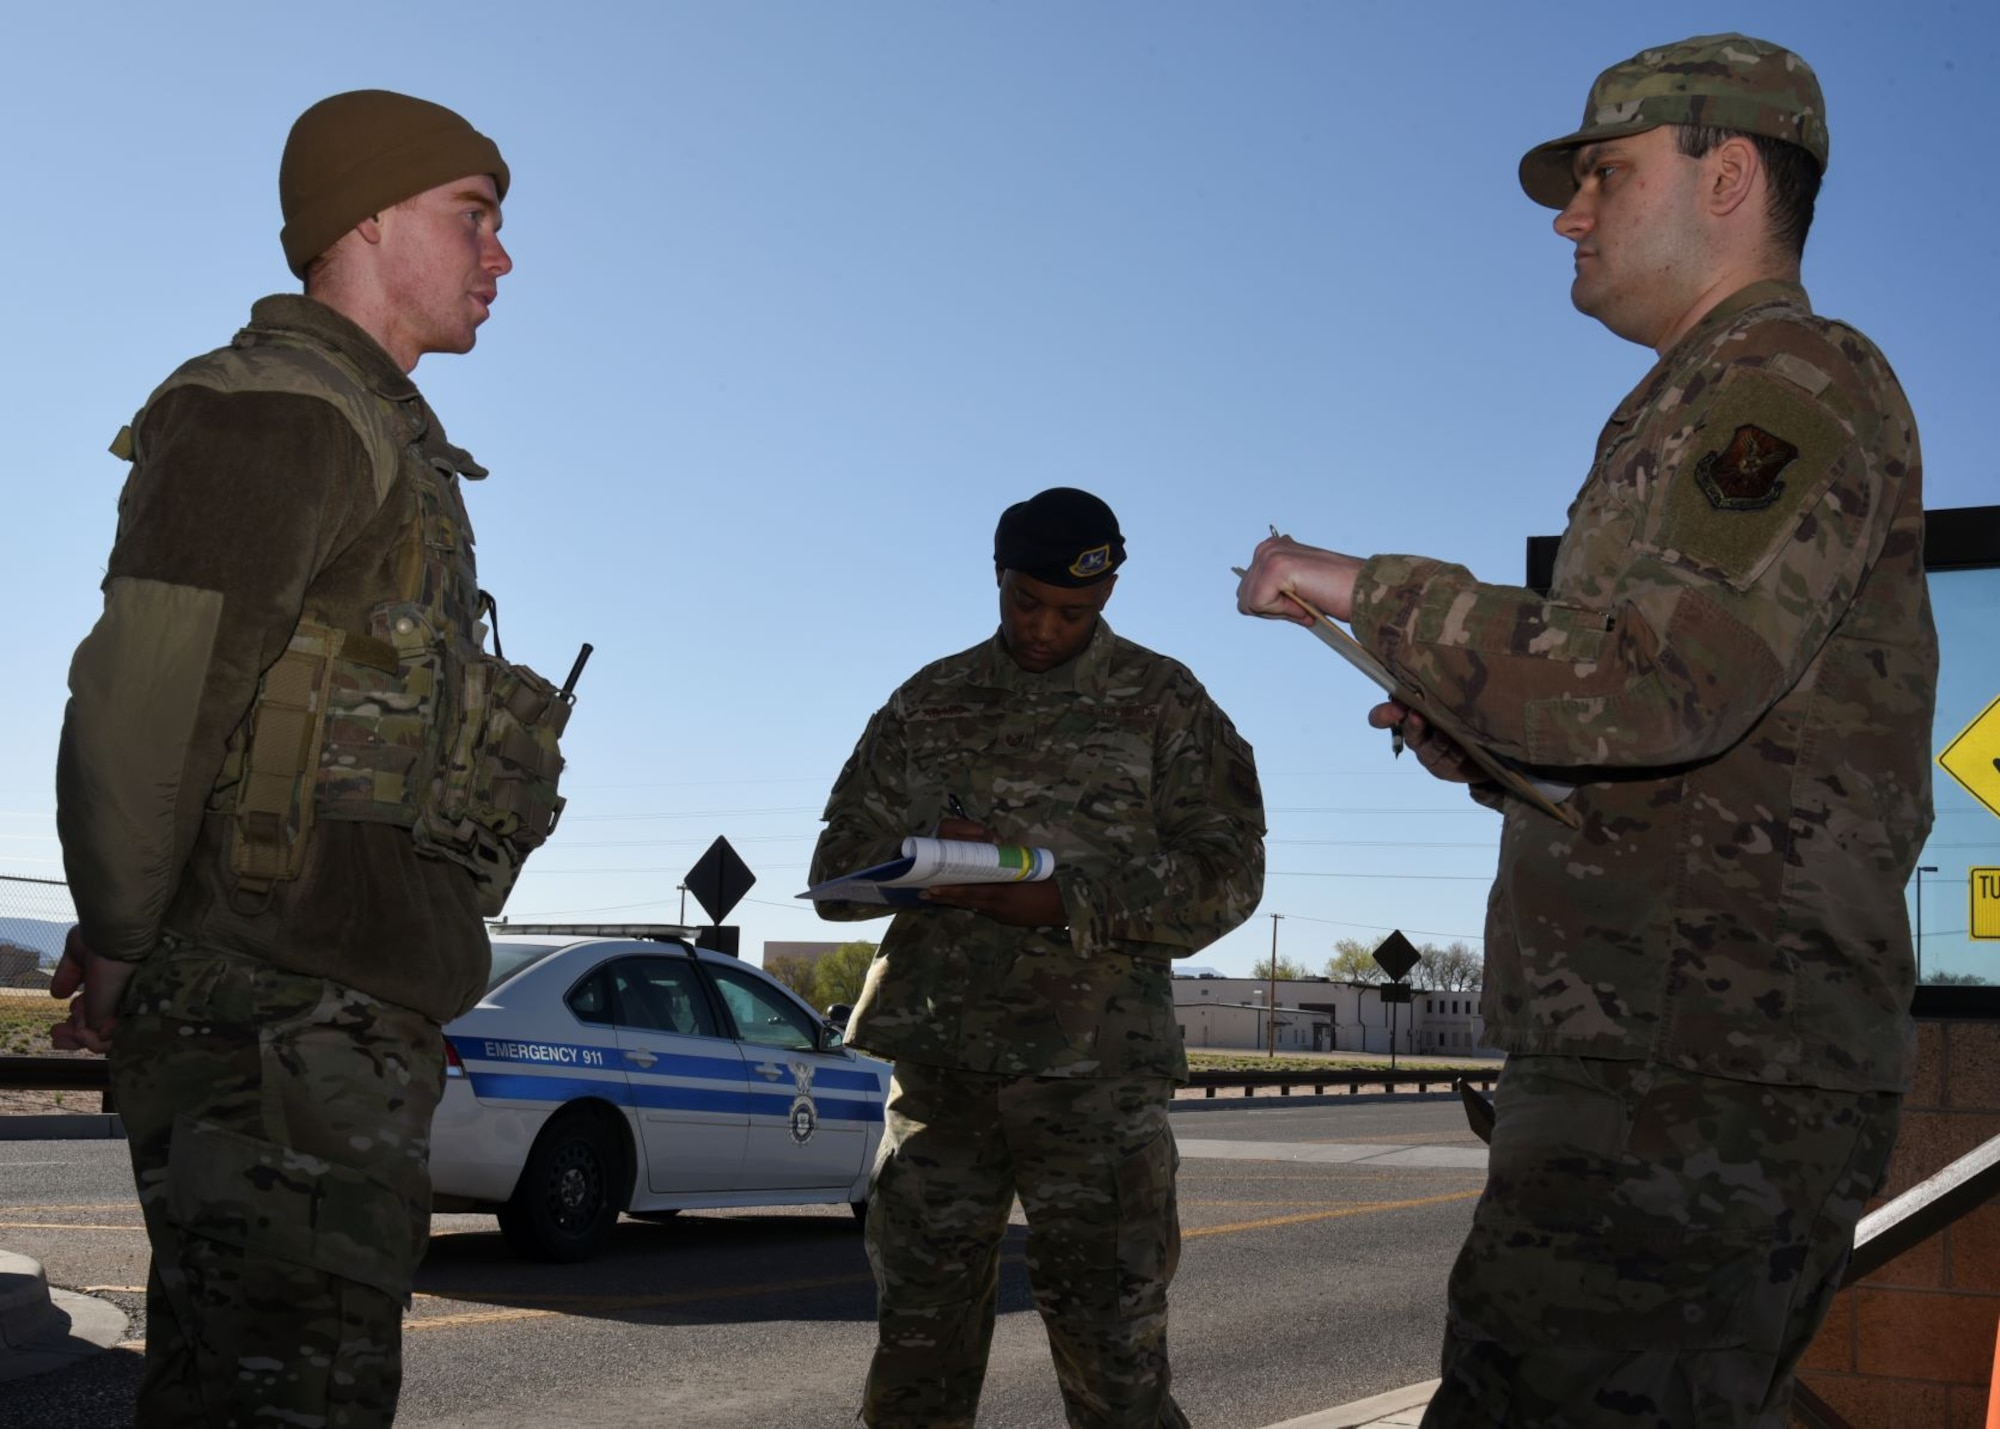 A team asks questions to a security forces member at the Truman Gate